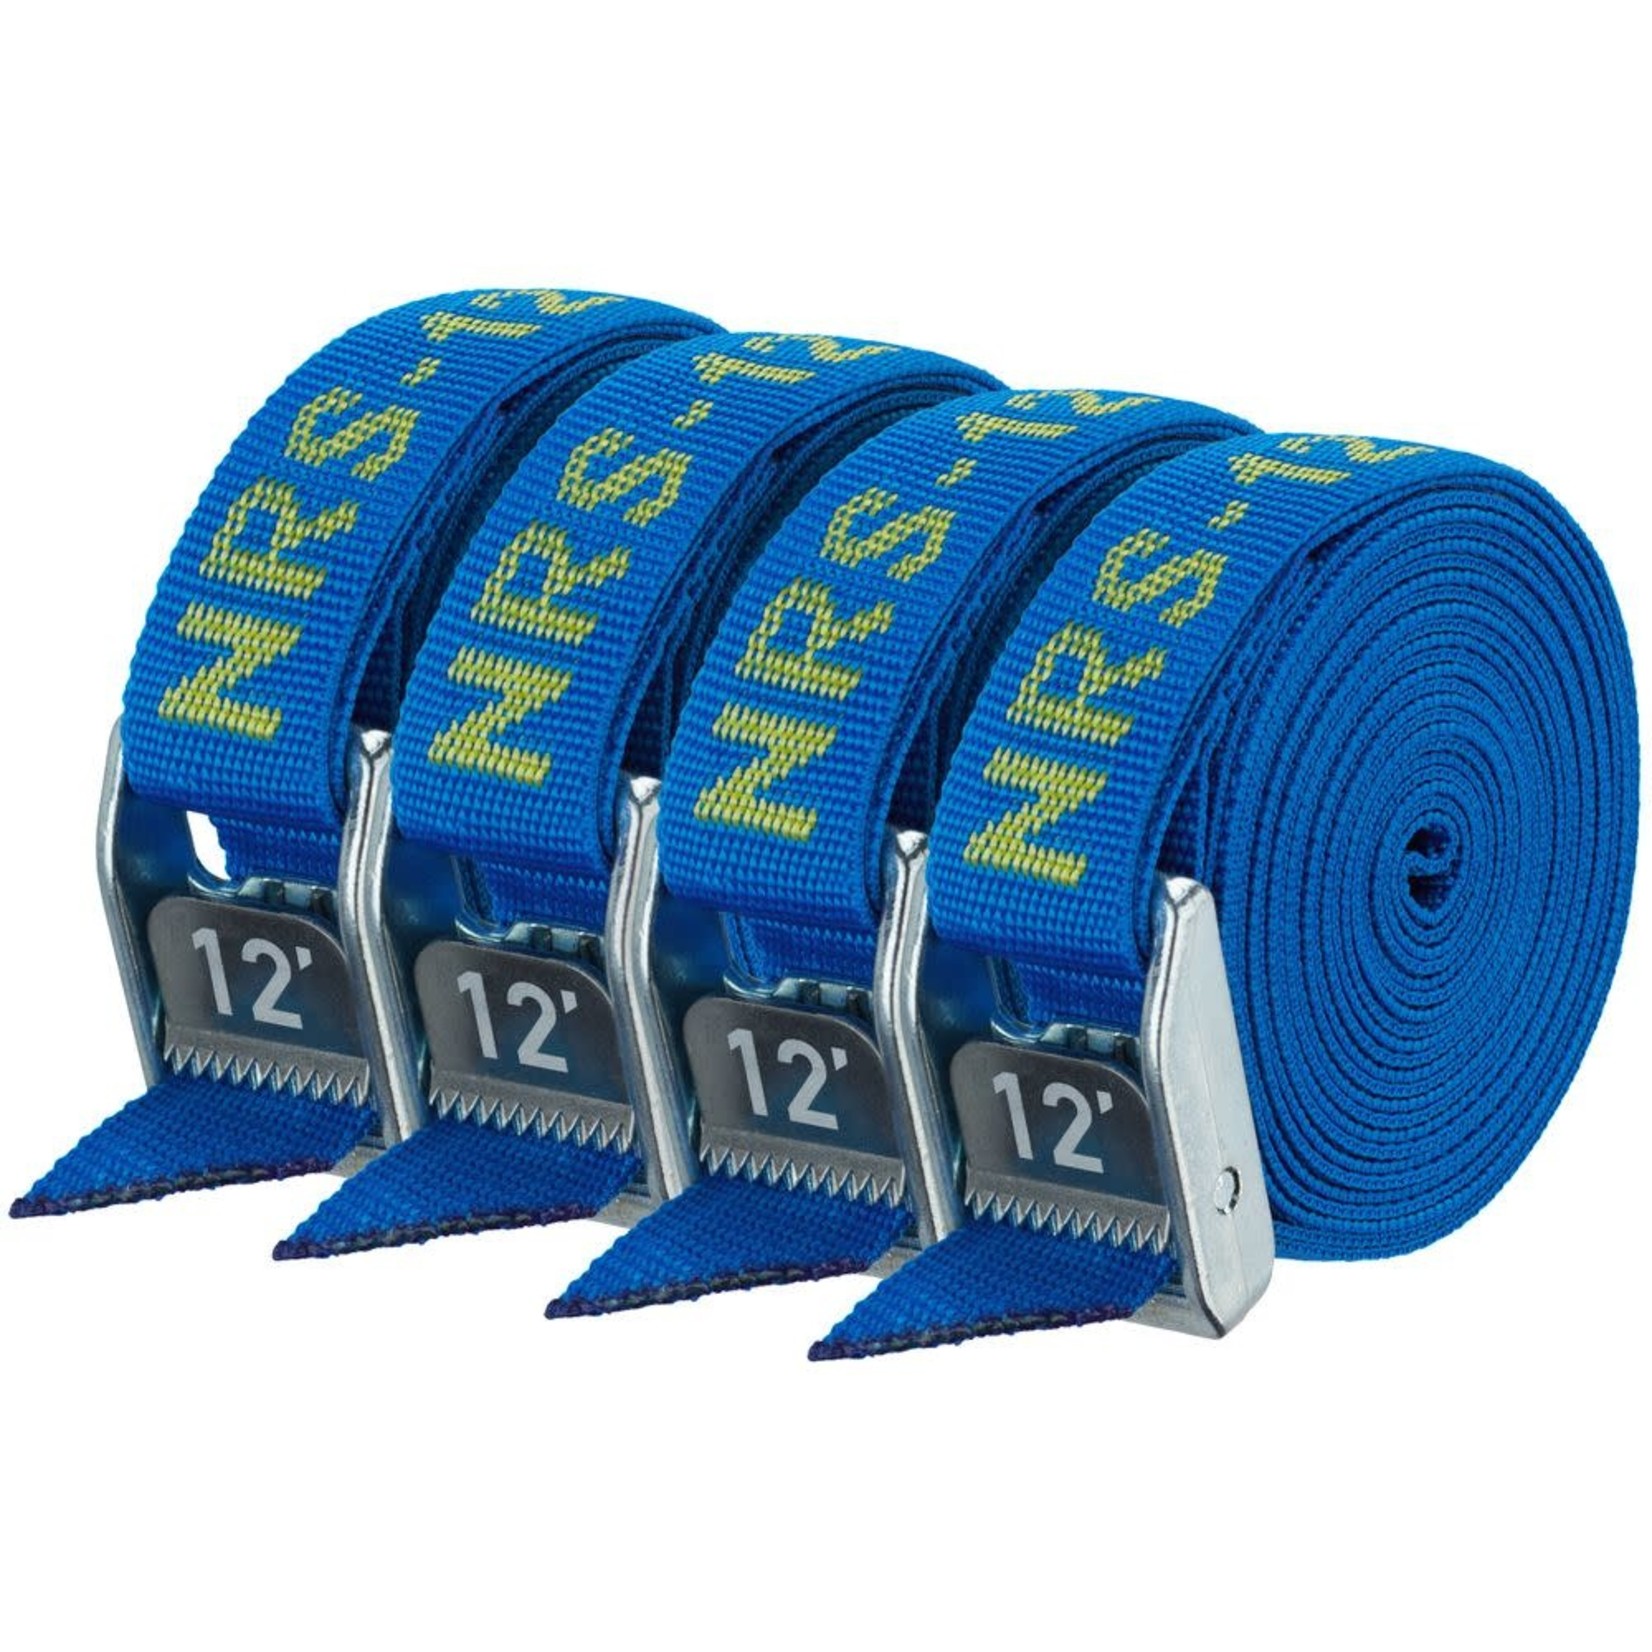 NRS NRS 1" HD Tie-Down Straps Iconic Blue 12' 4-pack